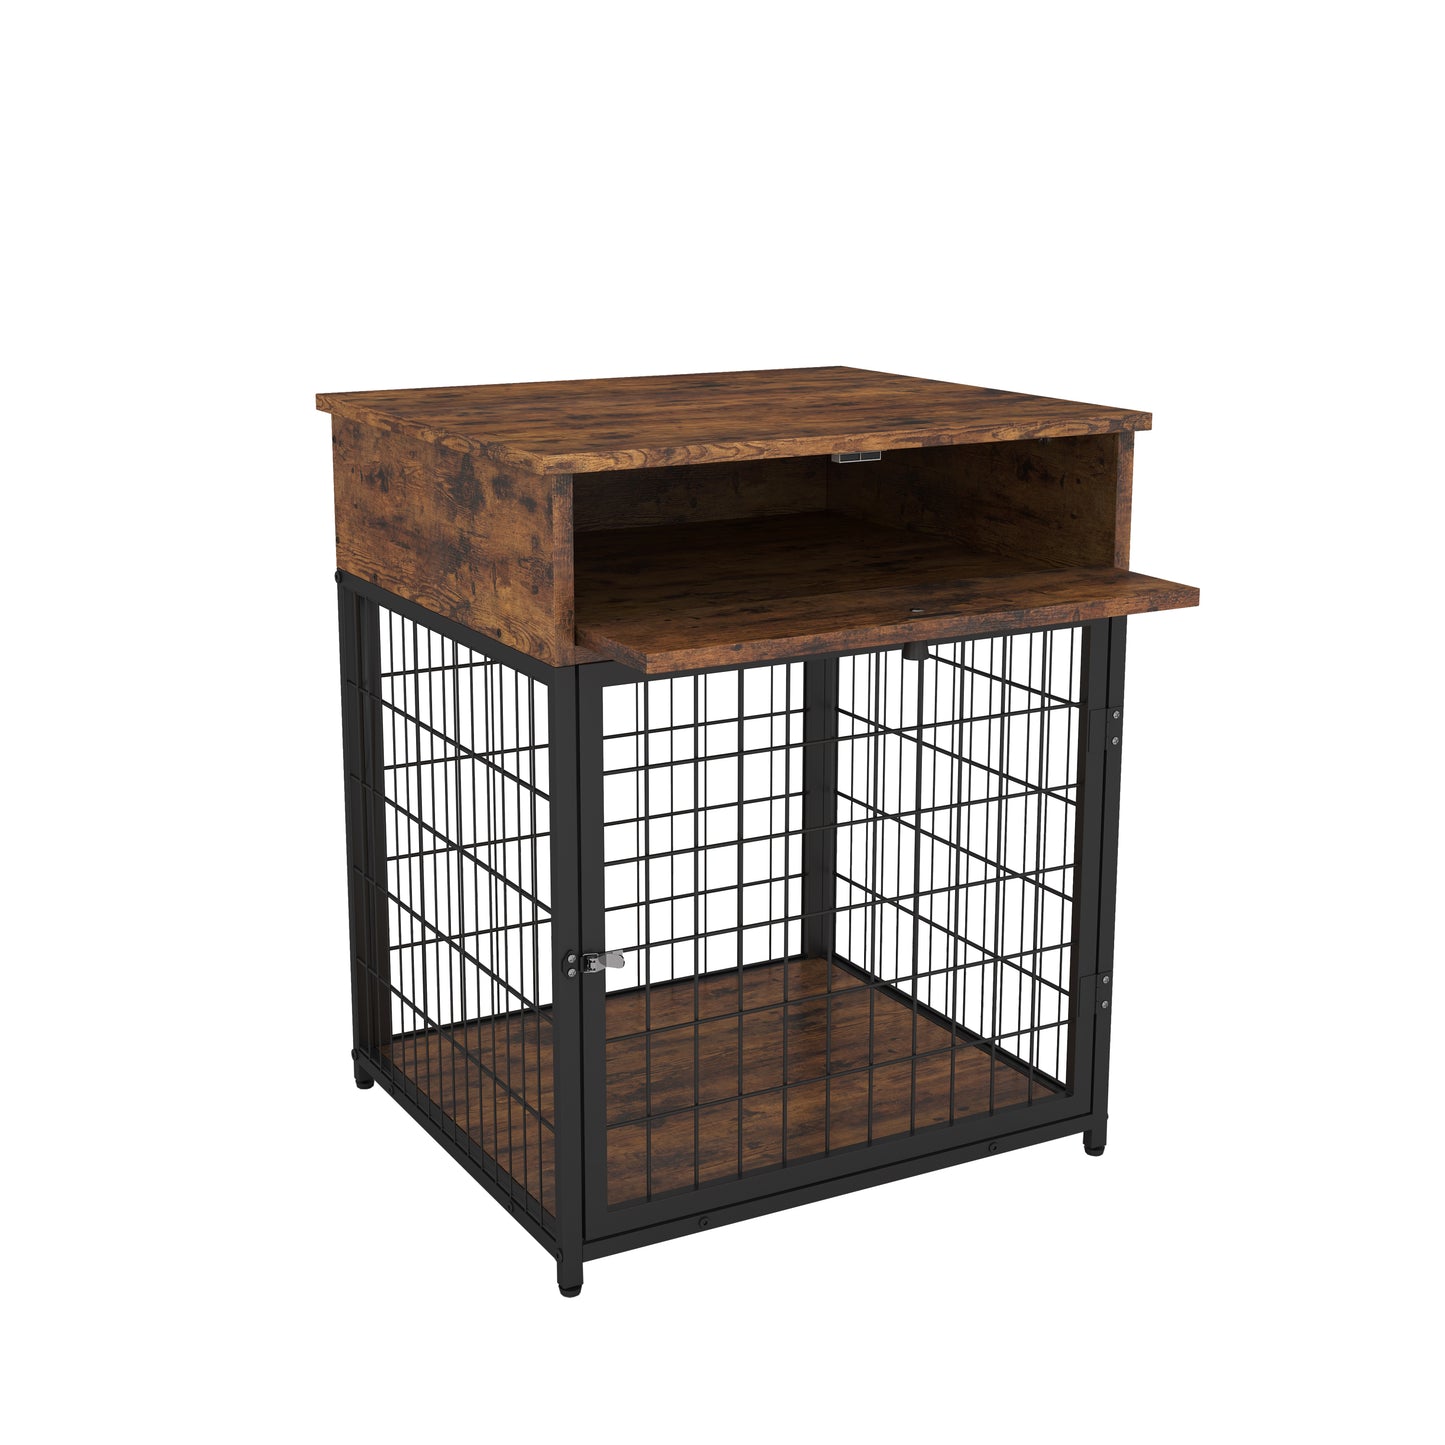 Furniture Dog Crates for small dogs Wooden Dog Kennel Dog Crate End Table, Nightstand (Rustic Brown)